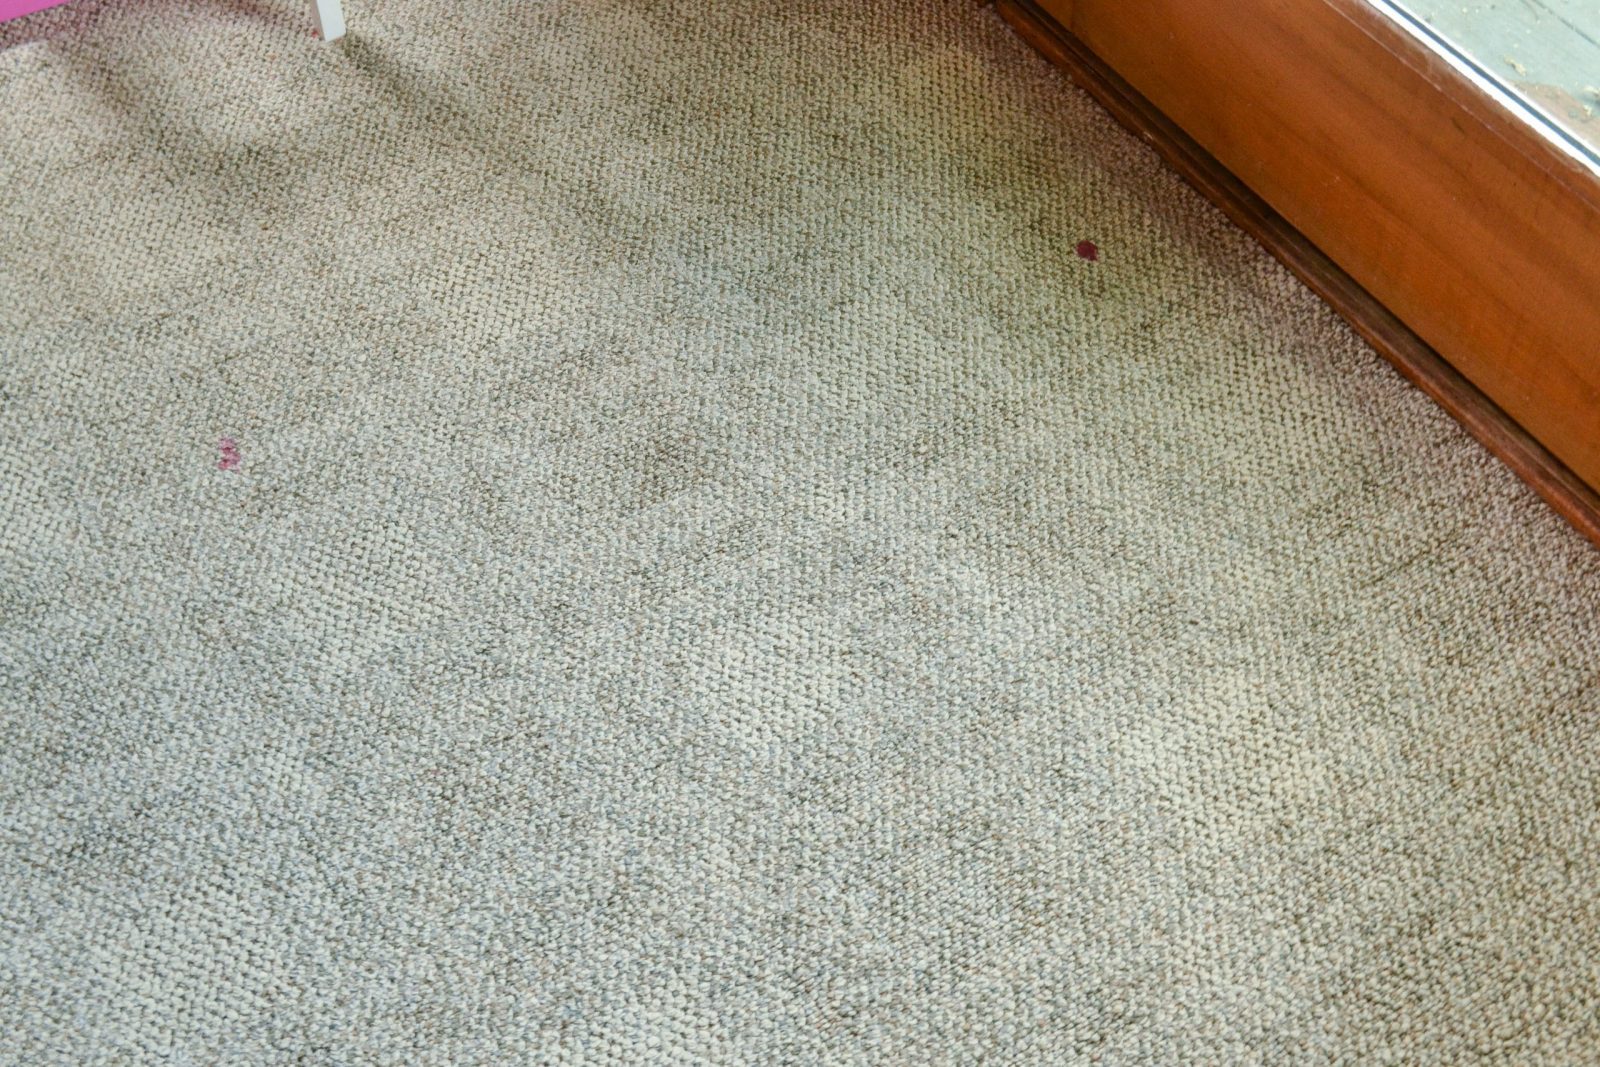 Hoover carpet review